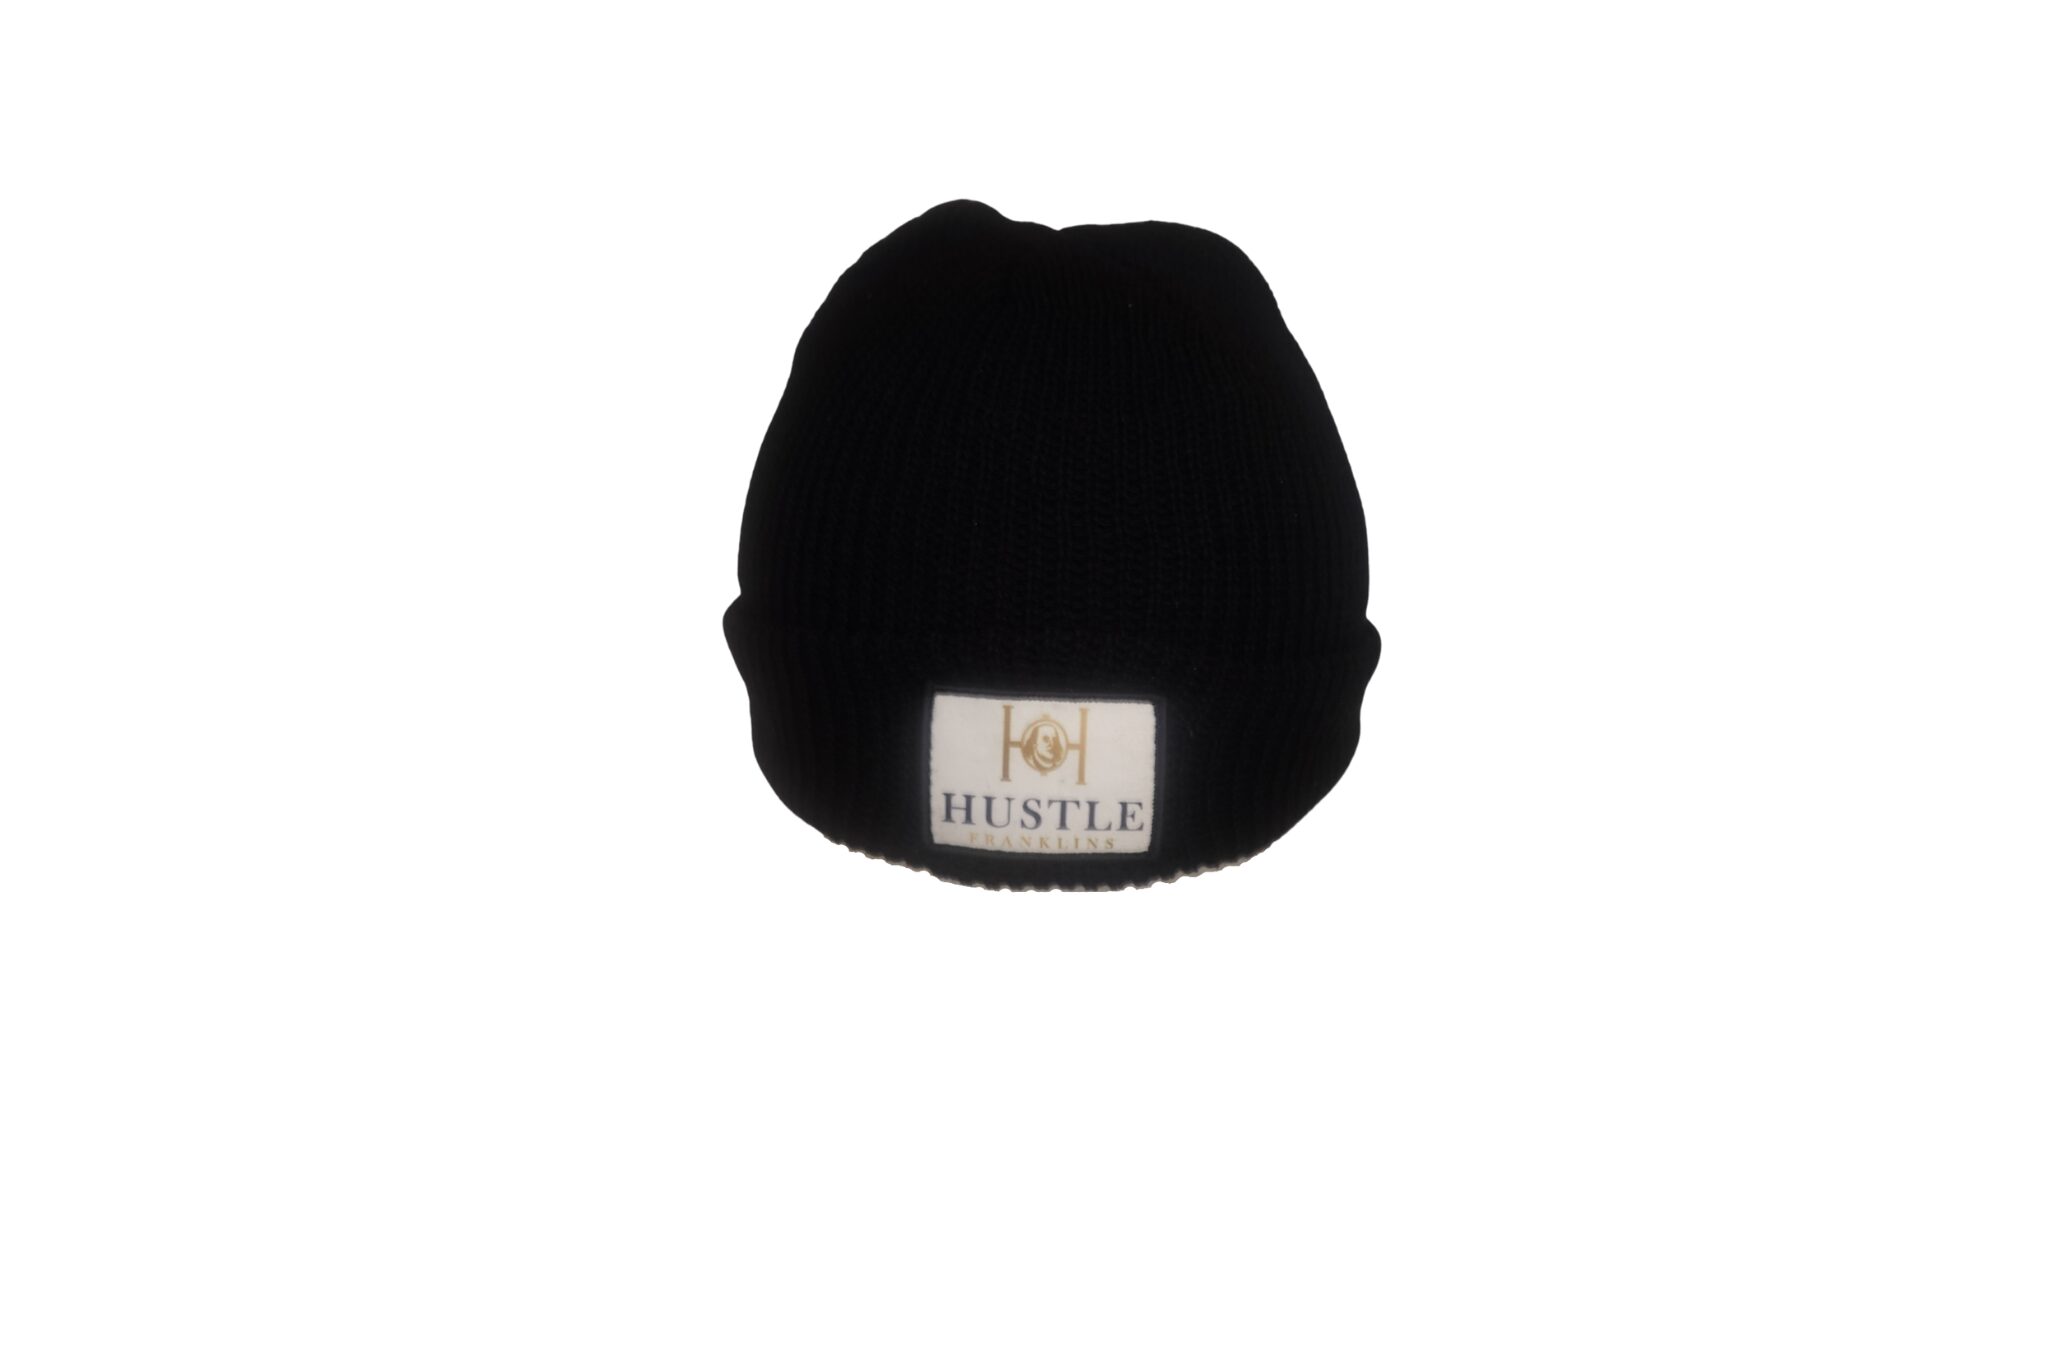 Hustle Franklins Classic Logo Beanie Skully this great for every Hustler. This Hustle Ski Mask is great for Young and Old Hustlers whether you skiing or just showing off your Hustle Apparel. Hustle Franklins representing a Hustle Brand like no other. This Hustle Franklins Beanie will be a great addition to your other Hustle Clothing. # 1 Hustle Clothing Brand